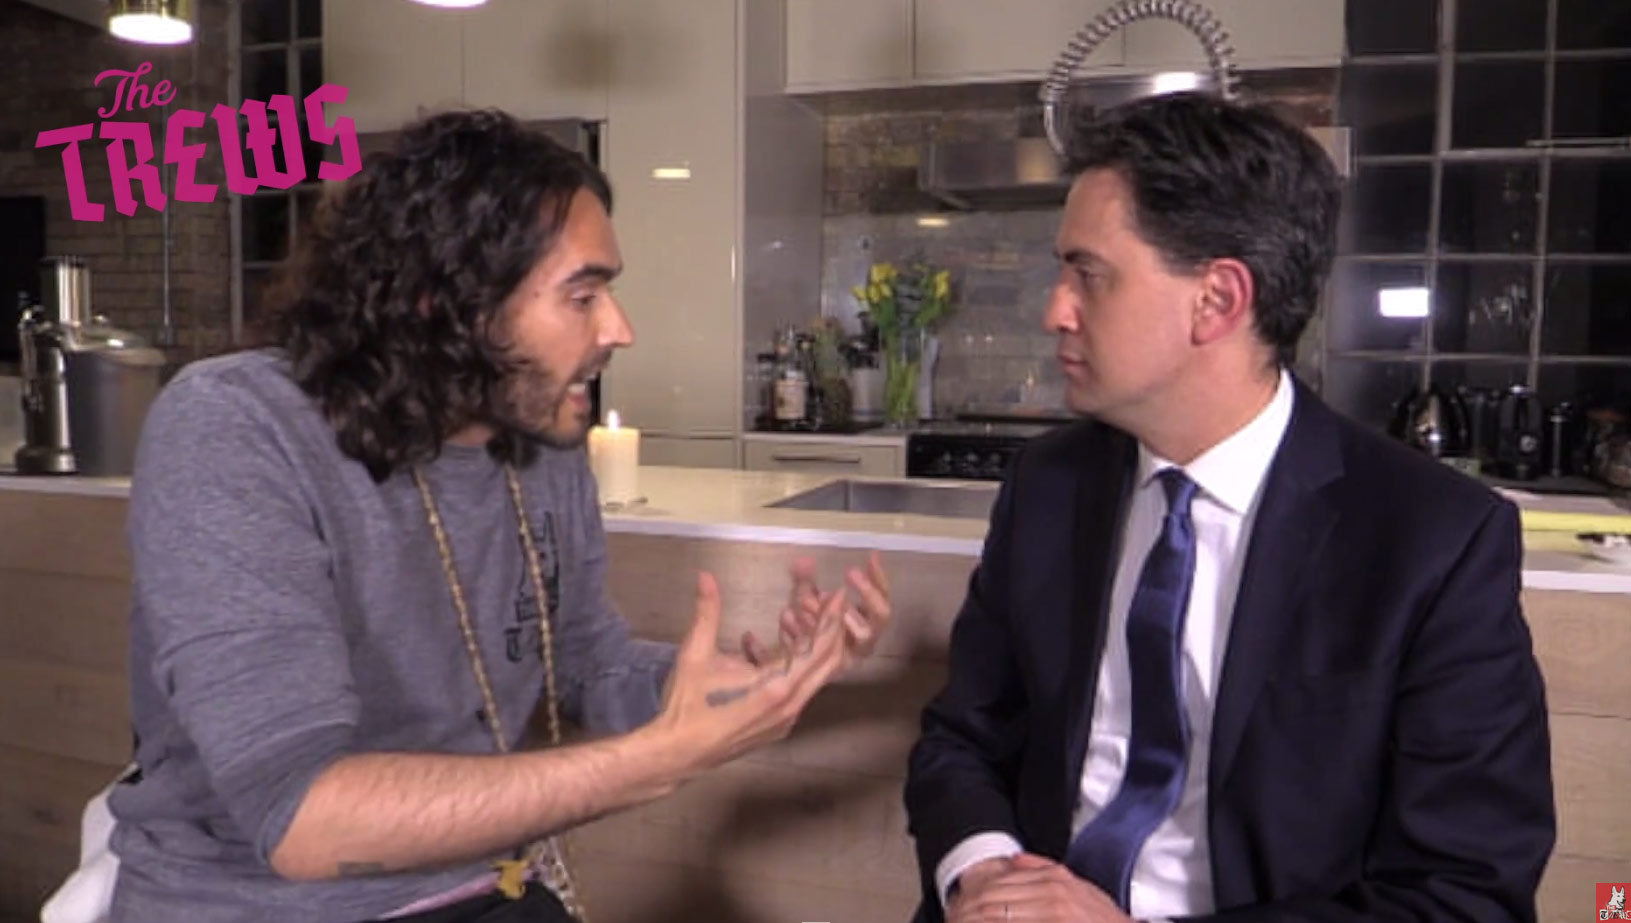 Russell Brand explains his model for revolution to Labour leader Ed Miliband.
